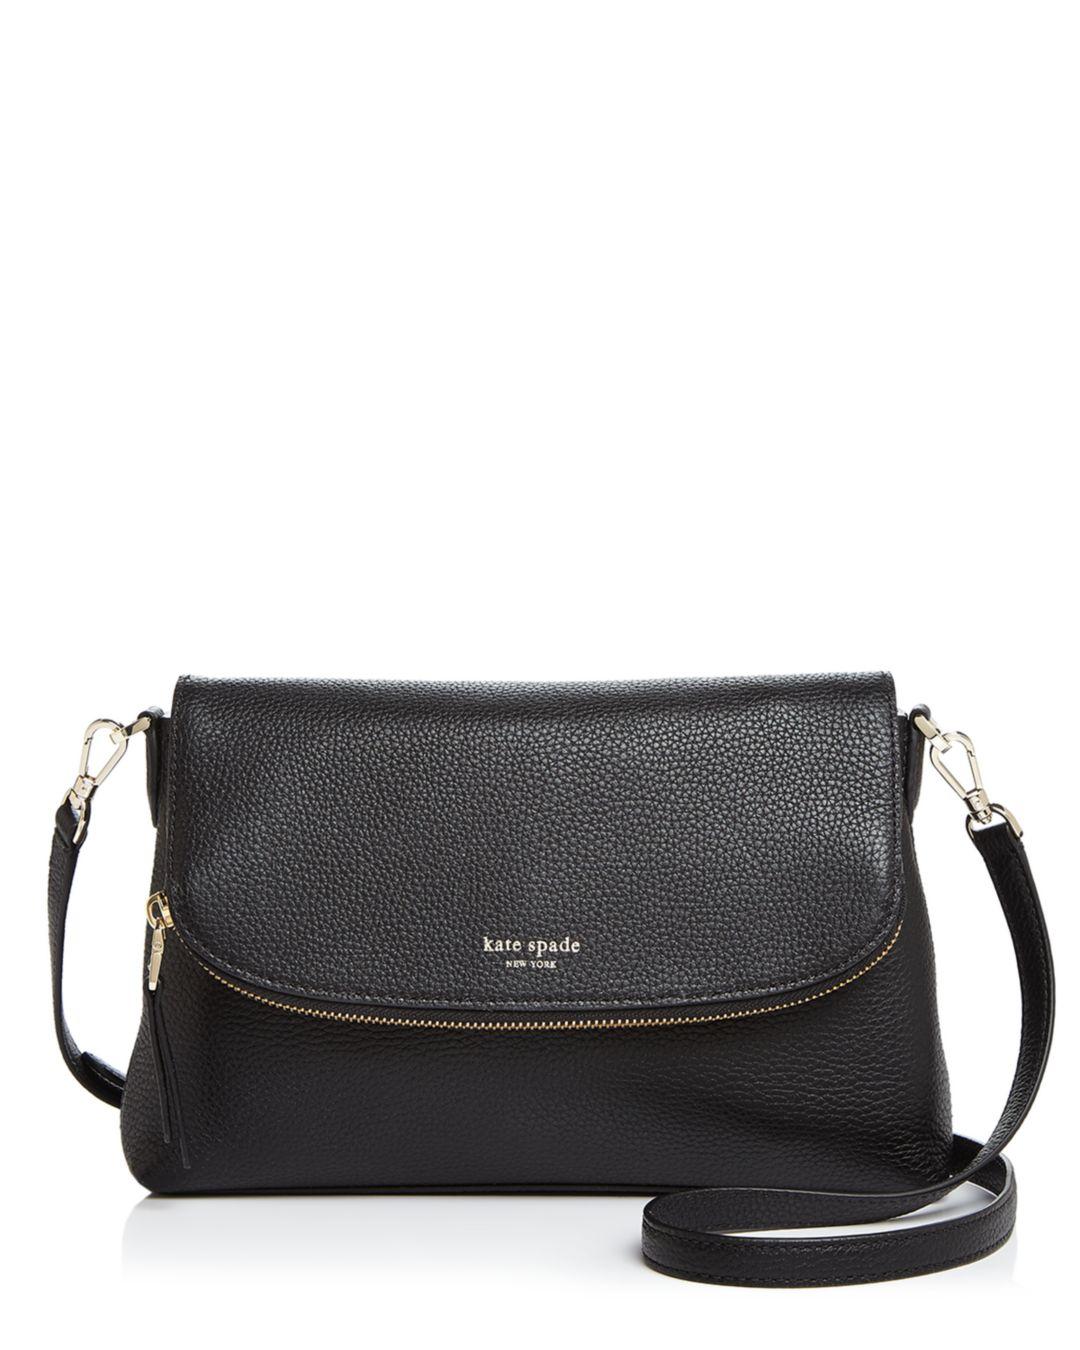 Lyst - Kate Spade Large Leather Crossbody in Black